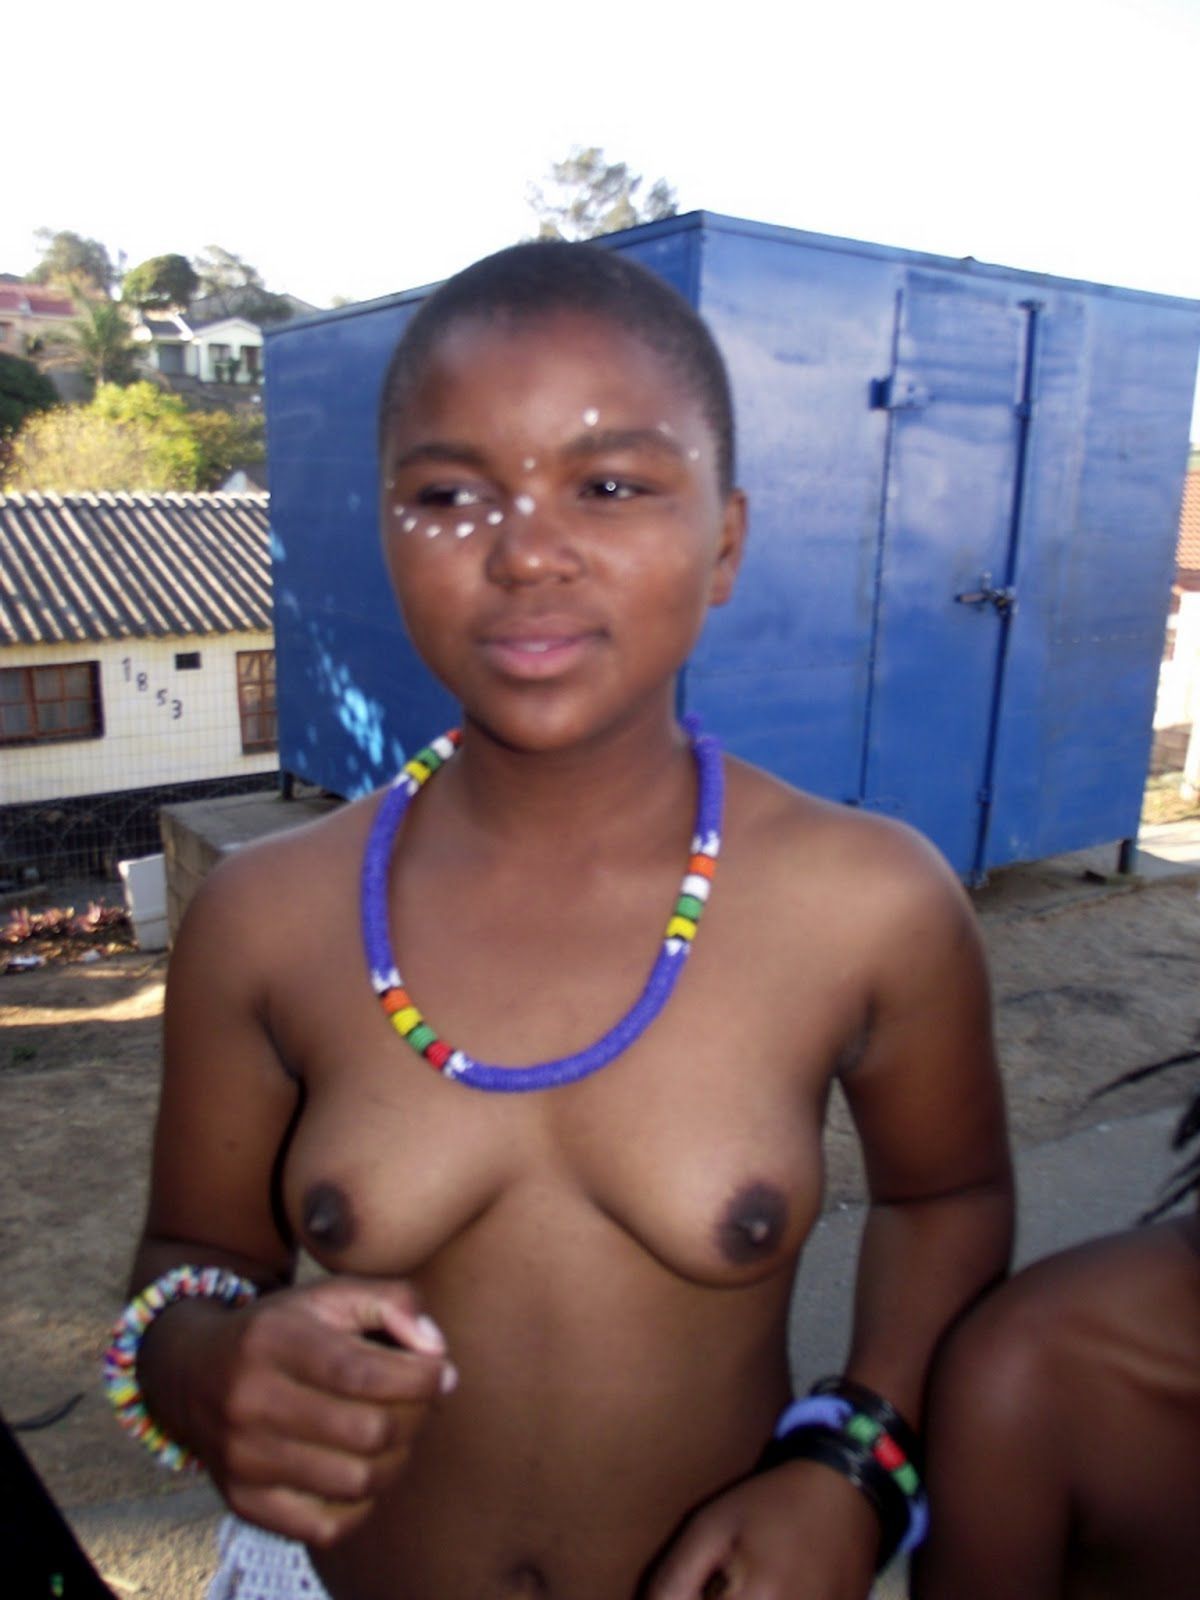 Nude wet tribal breasts pics